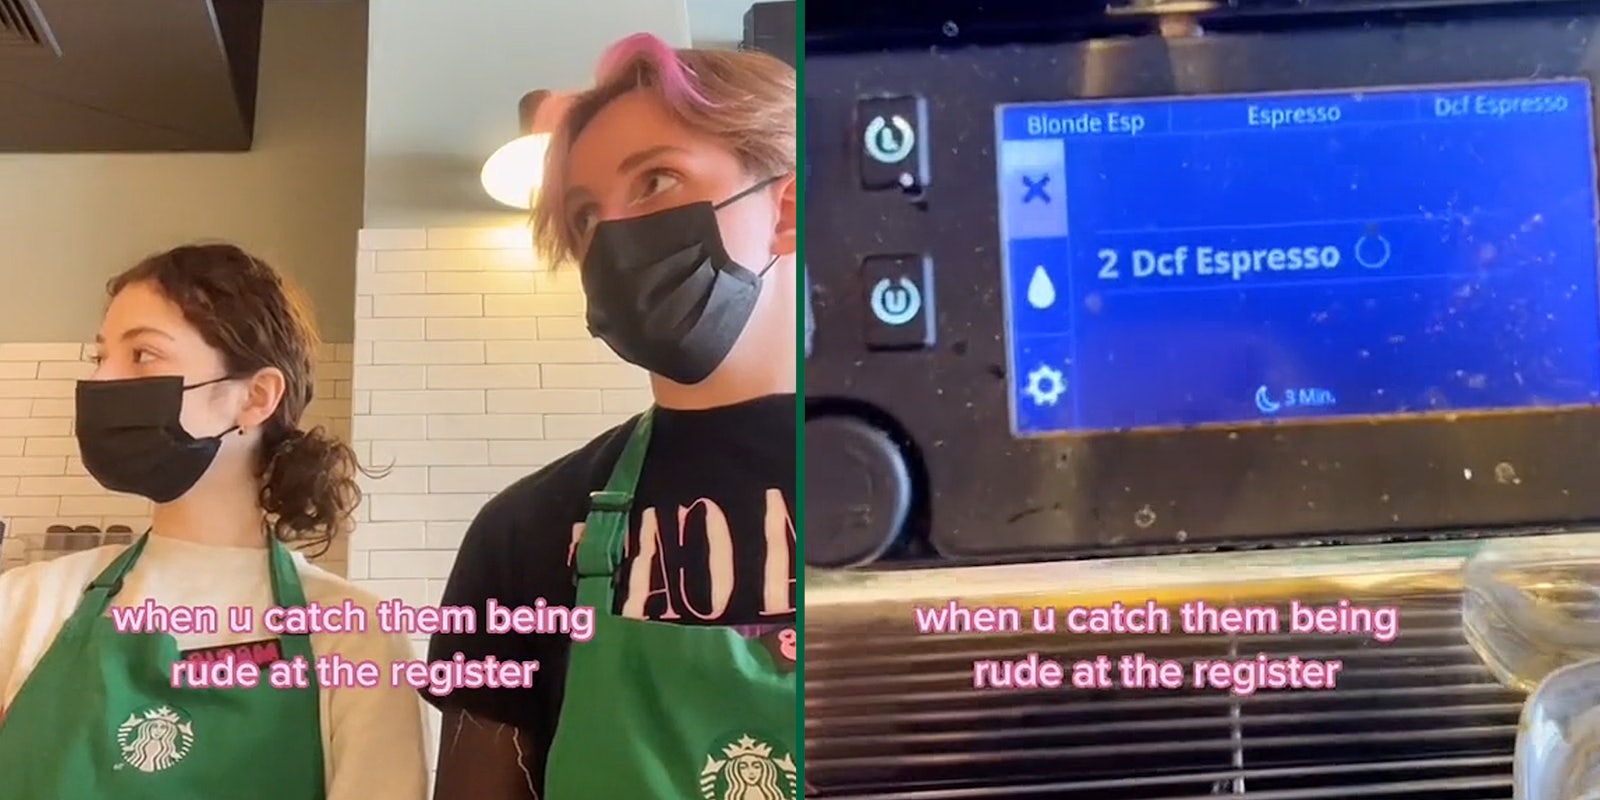 two starbucks workers (l) 2 Dcf Espresso selection on screen (r) both with caption 'when u catch them being rude at the register'